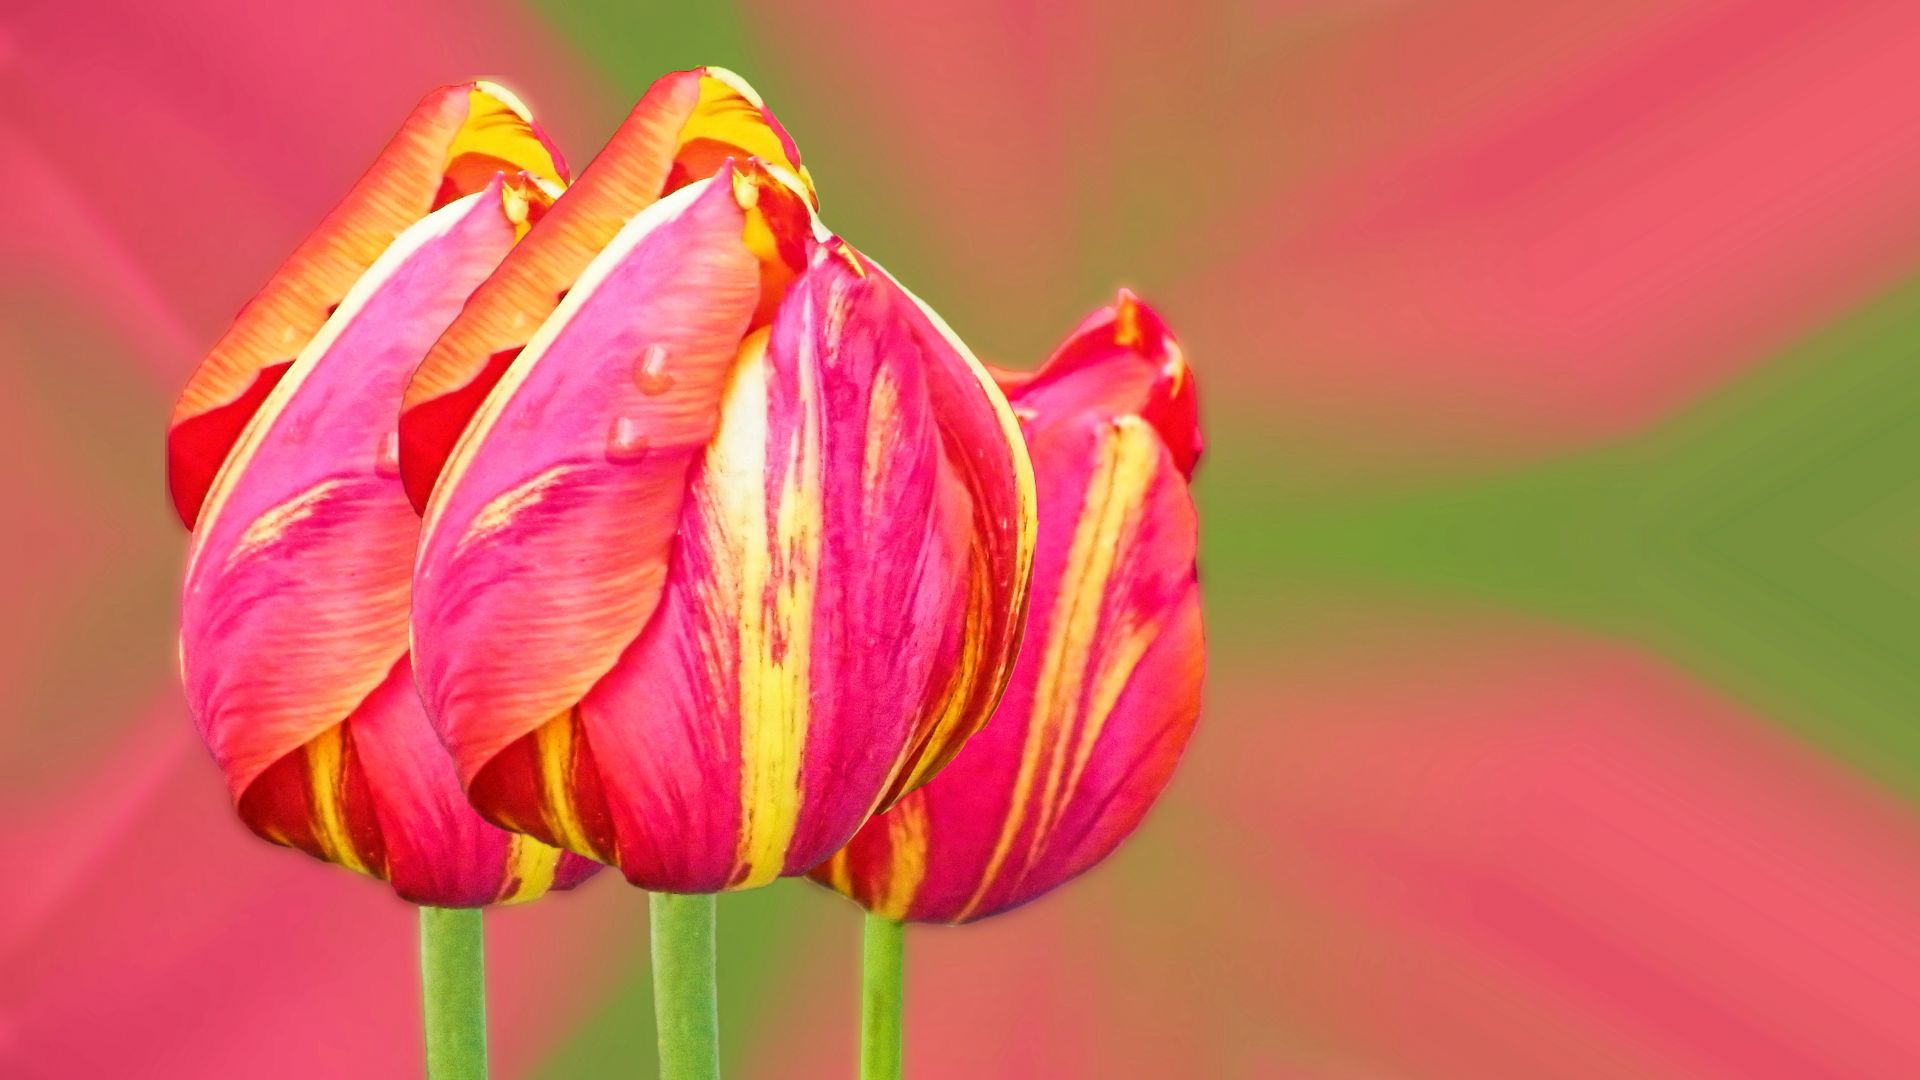 Wallpaper Tulips, Parrot Tulips, red yellow flowers